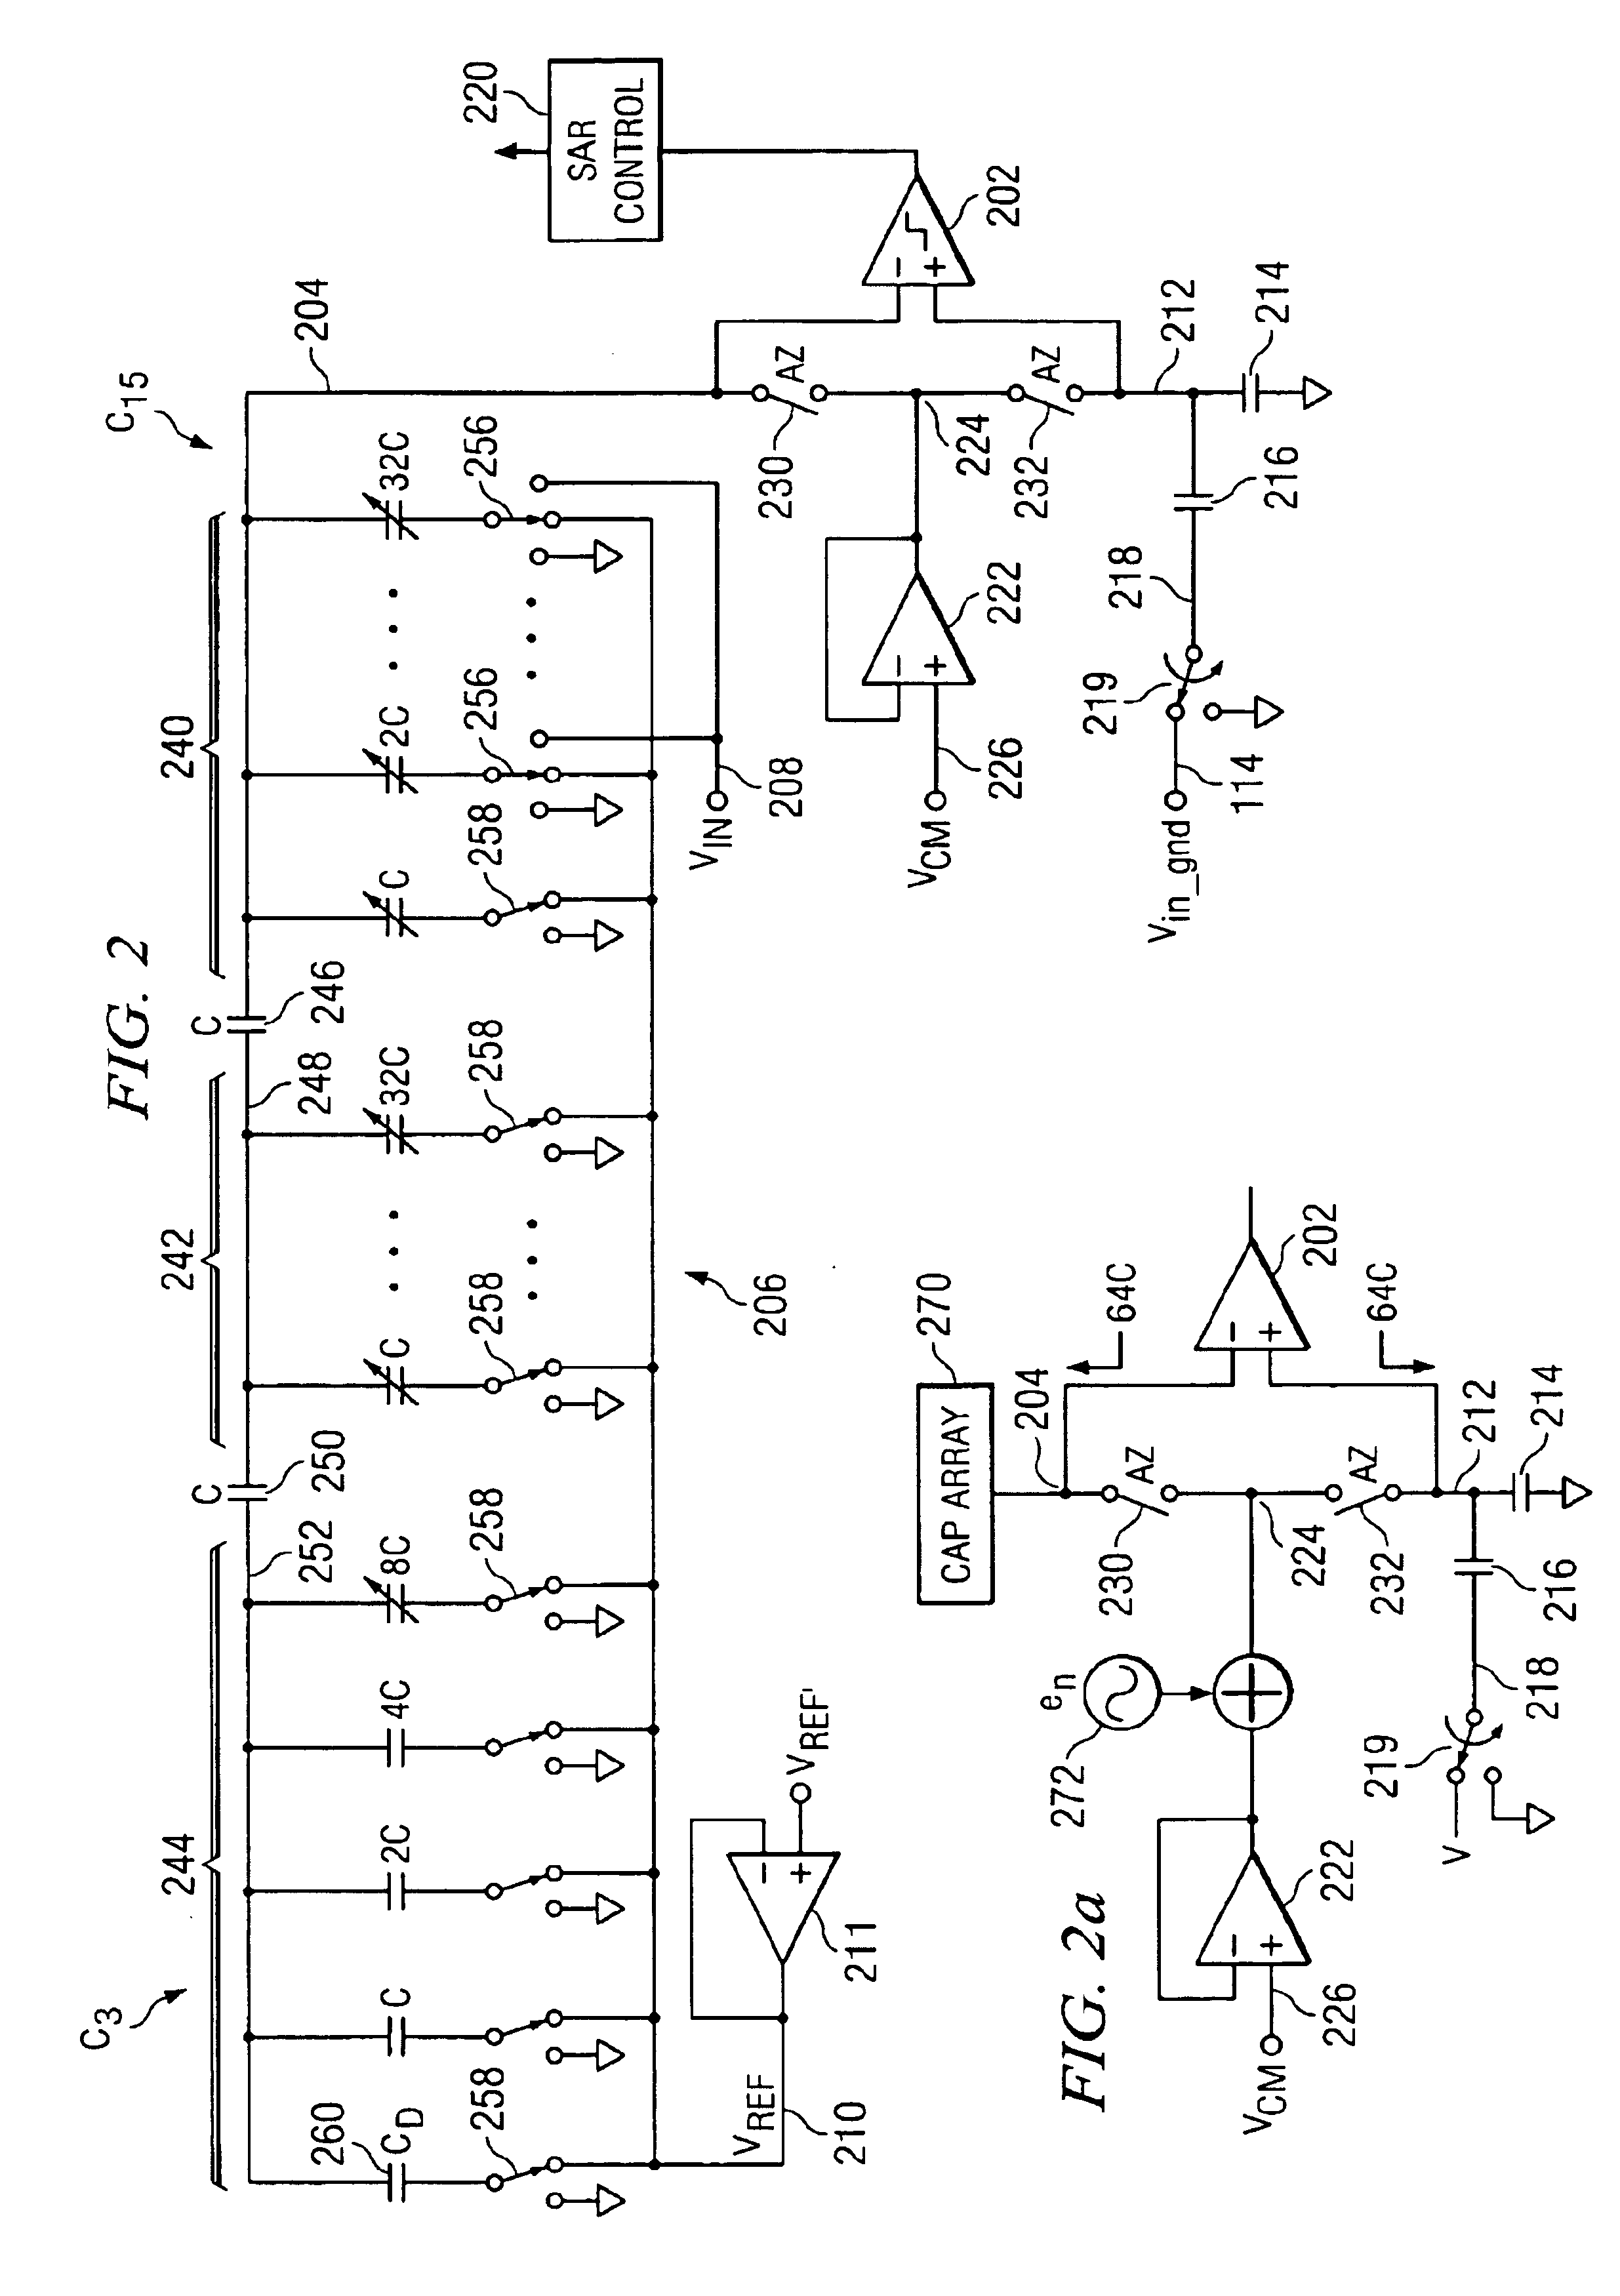 High speed comparator for a SAR converter with resistor loading and resistor bias to control common mode bias